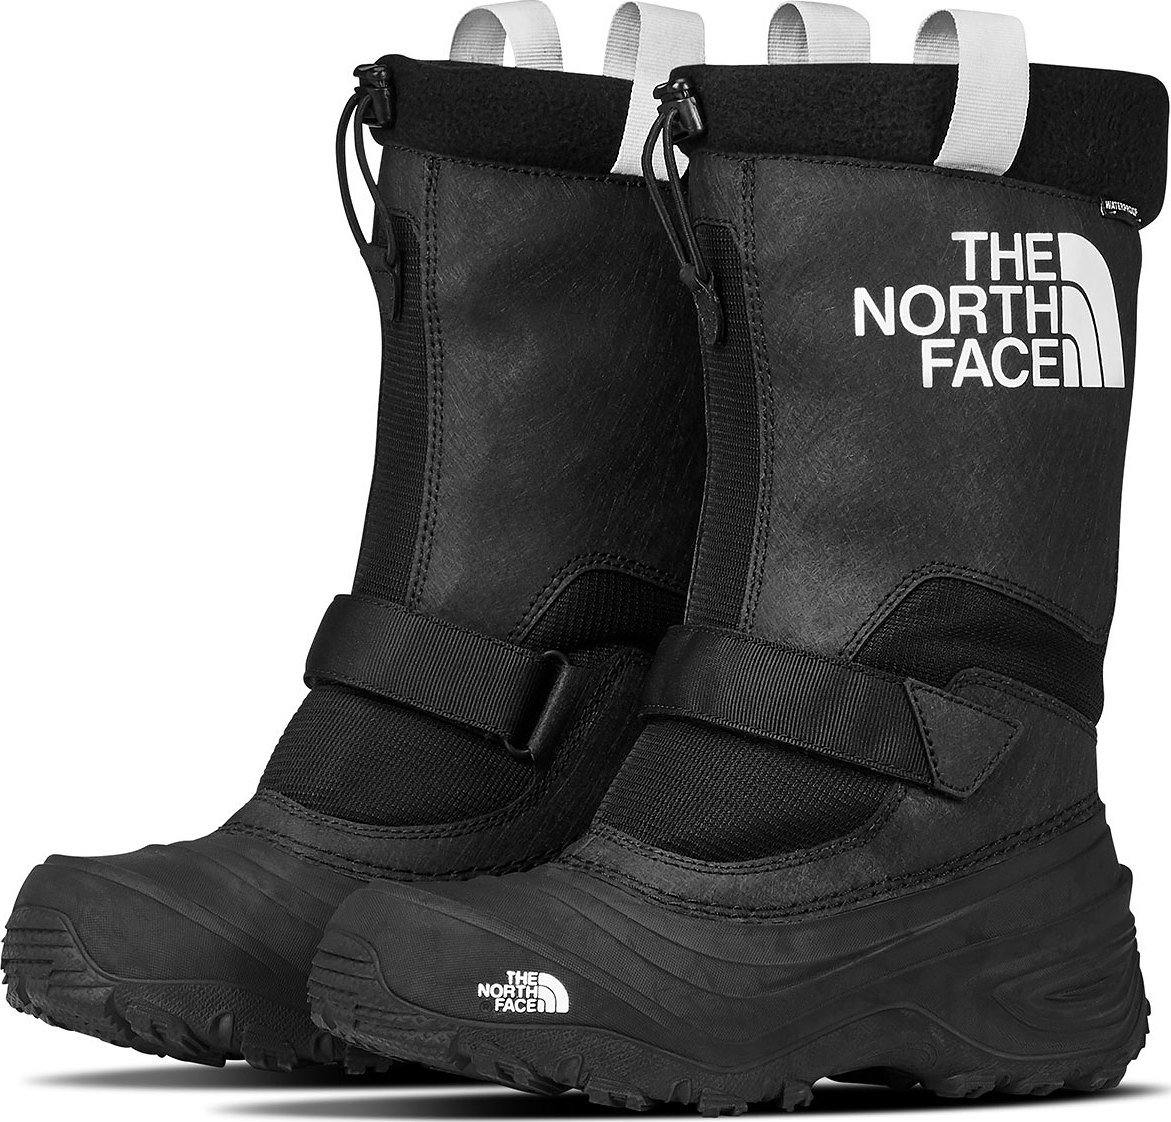 Product image for Alpenglow Extreme III Boots - Youth